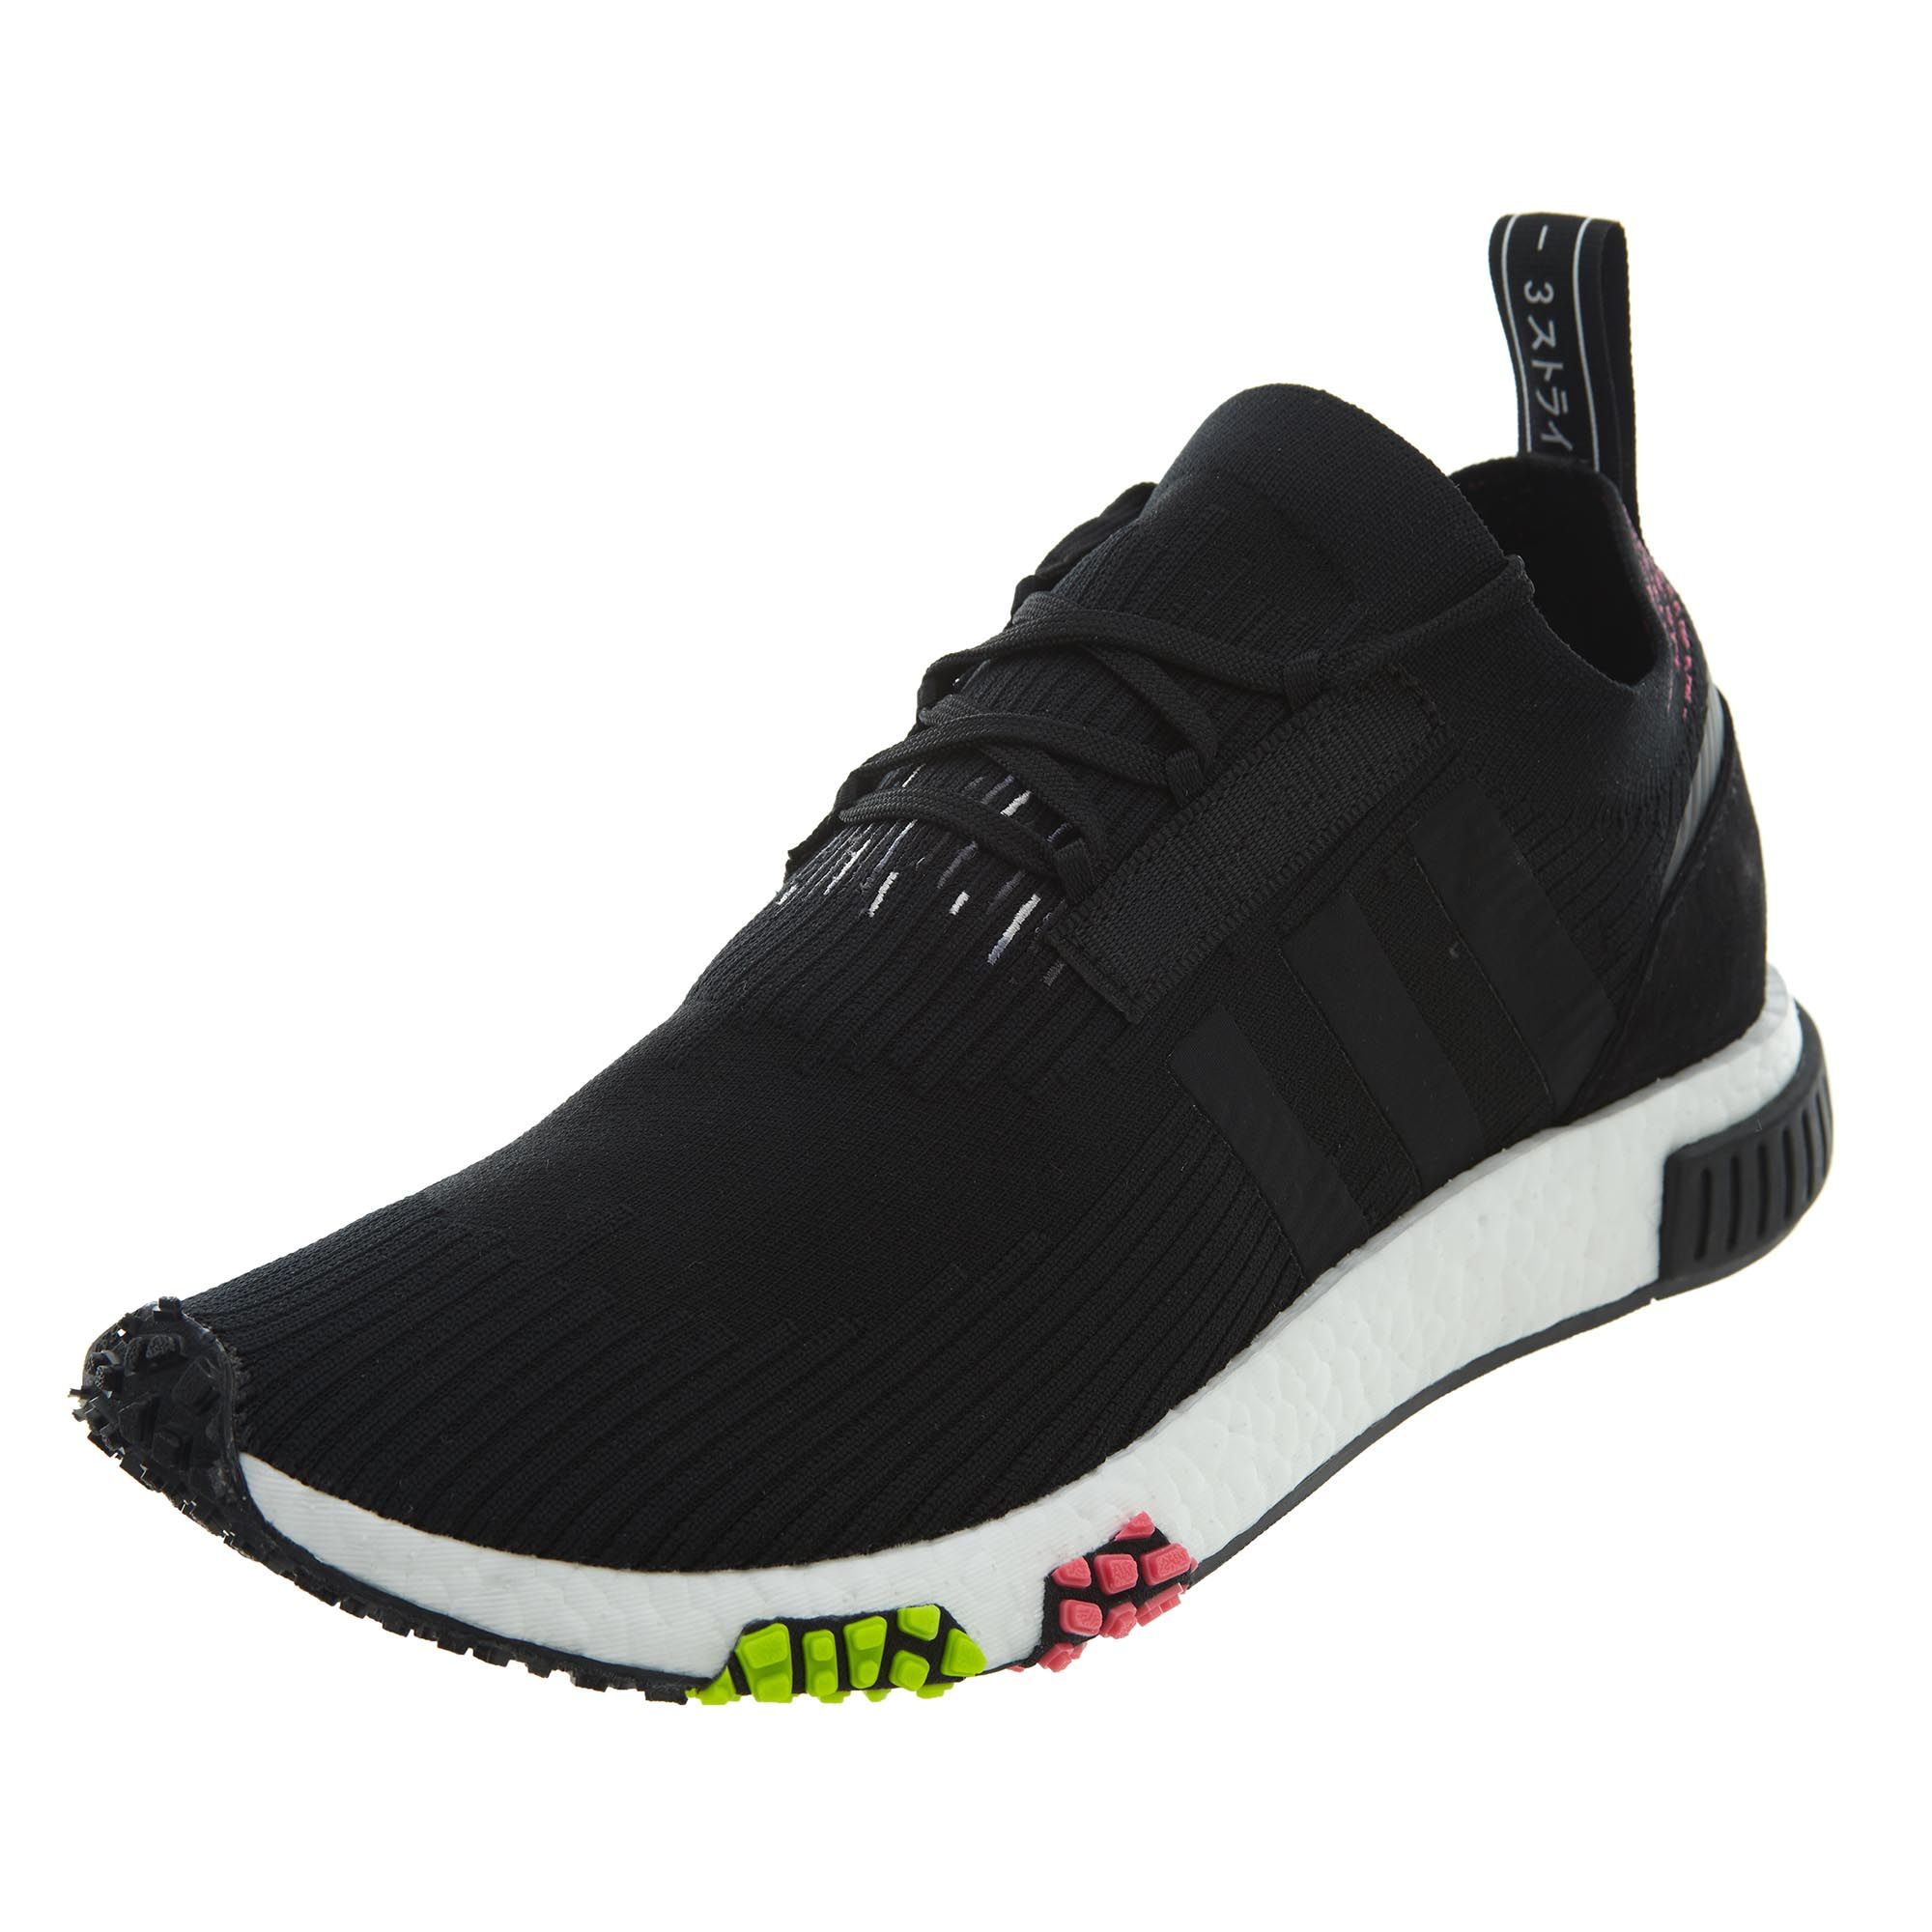 Adidas Nmd_racer Pk Mens Style : Cq2441-Blk/Pink